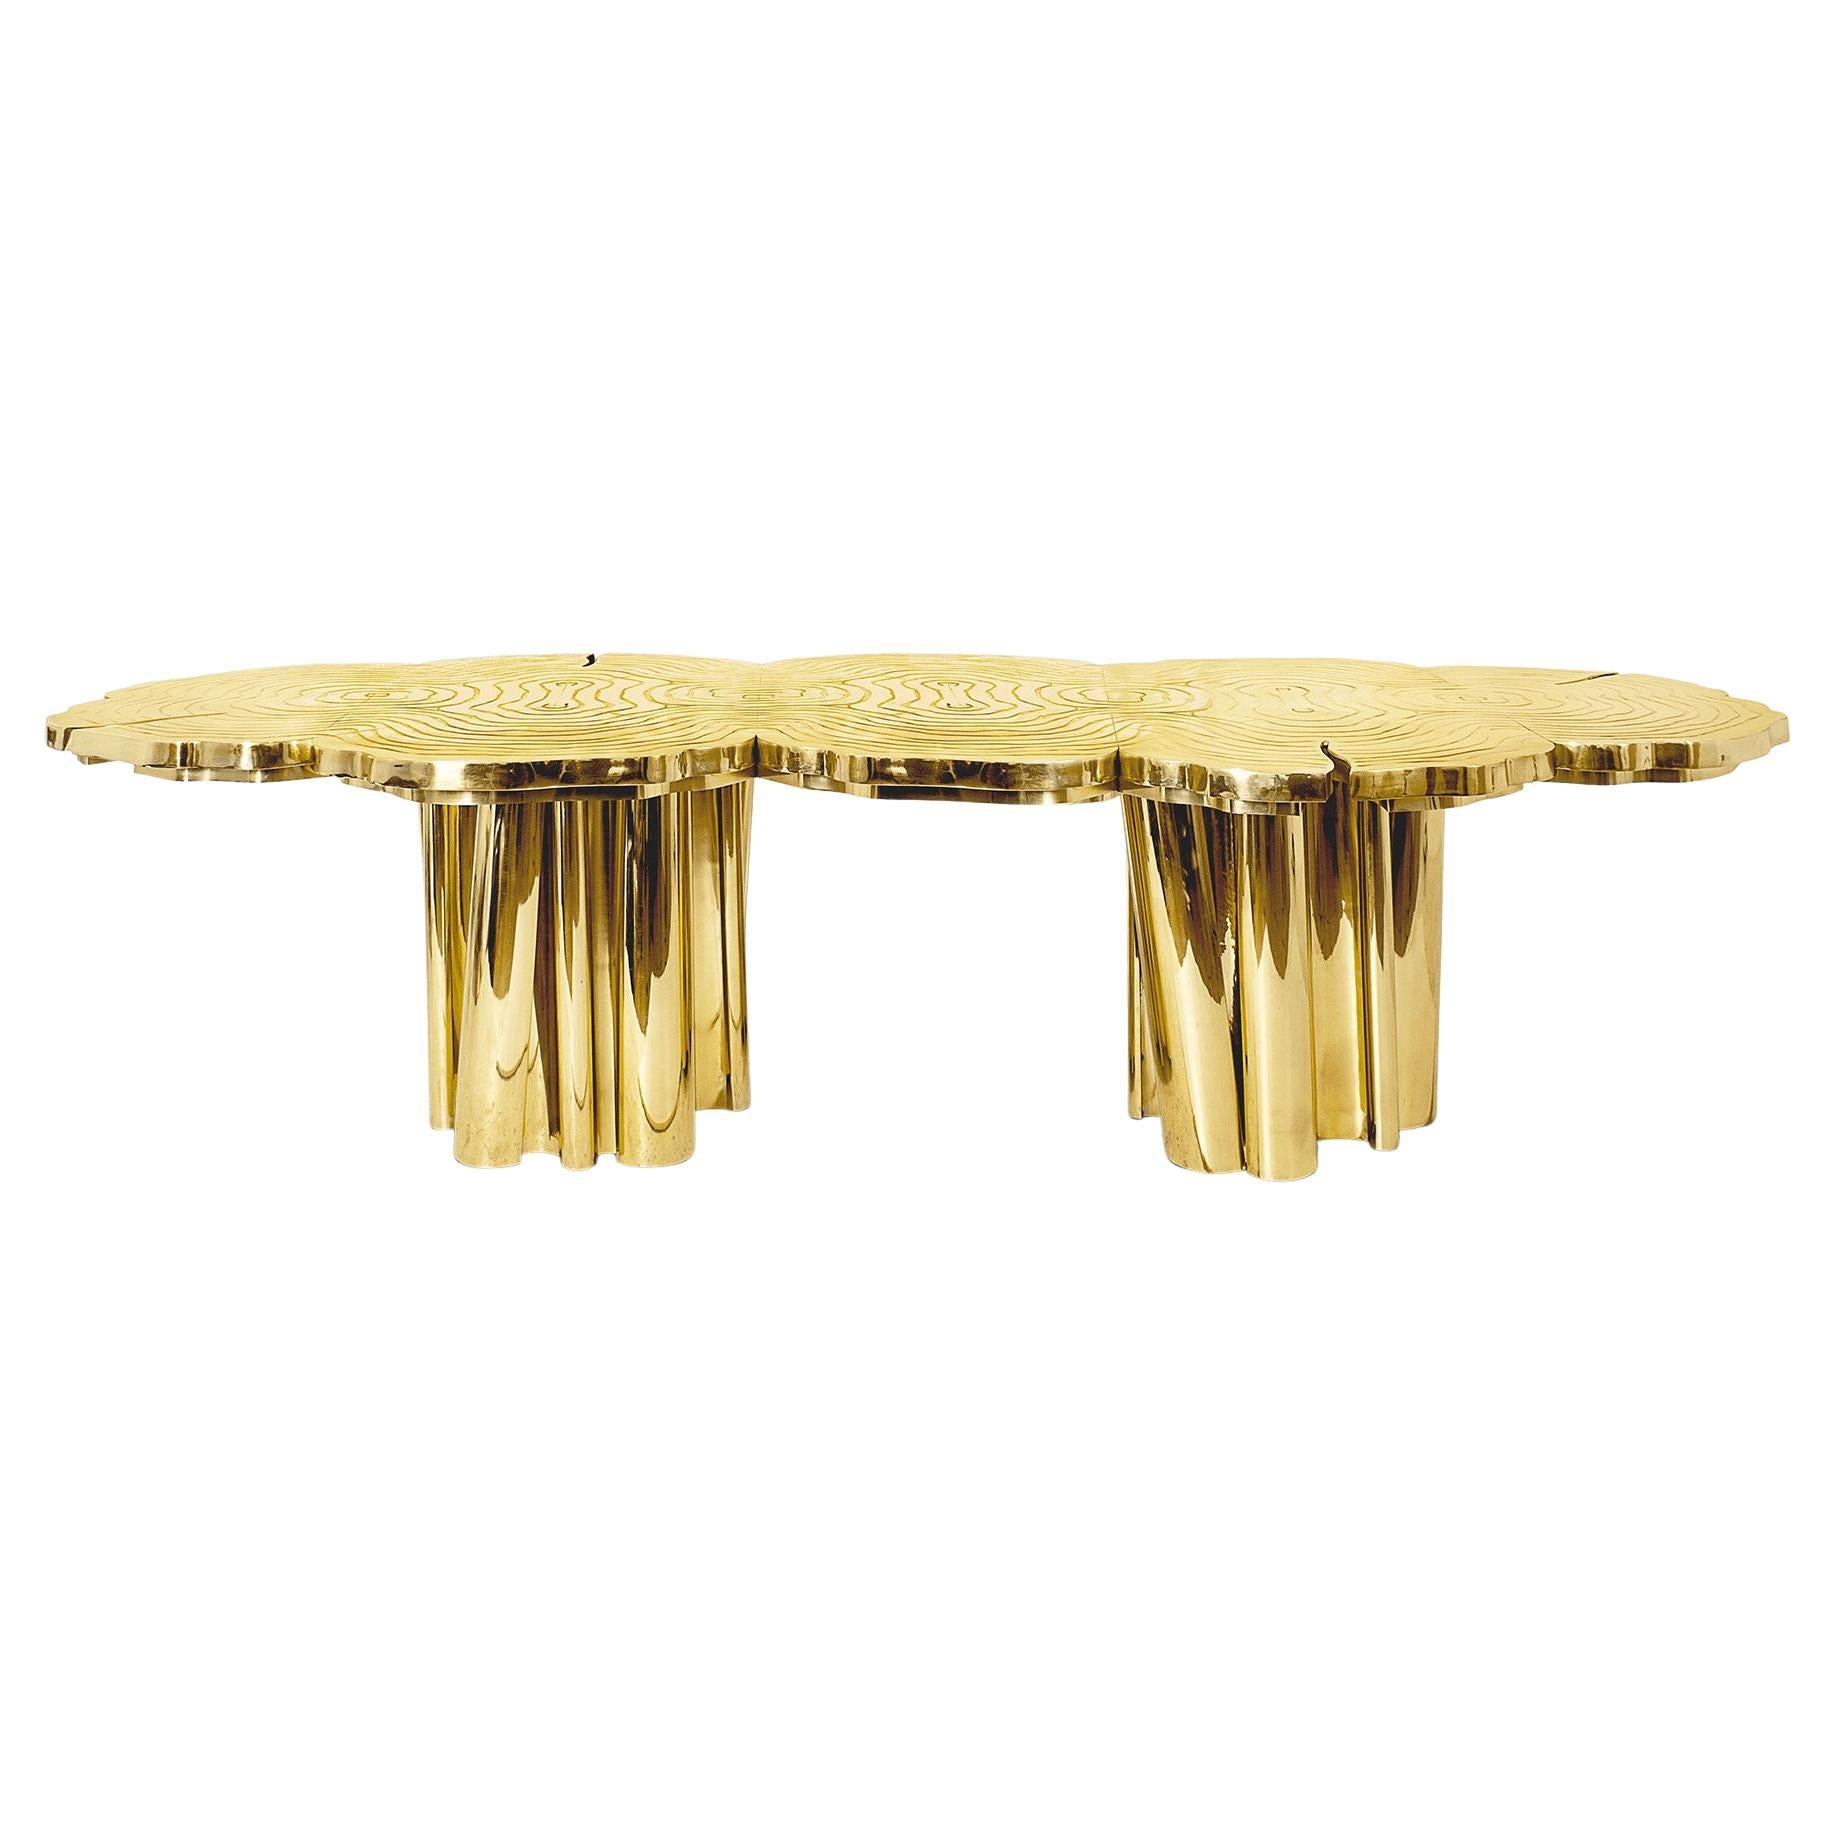 Design Table in Wood and Polished Brass "Arbre" For Sale